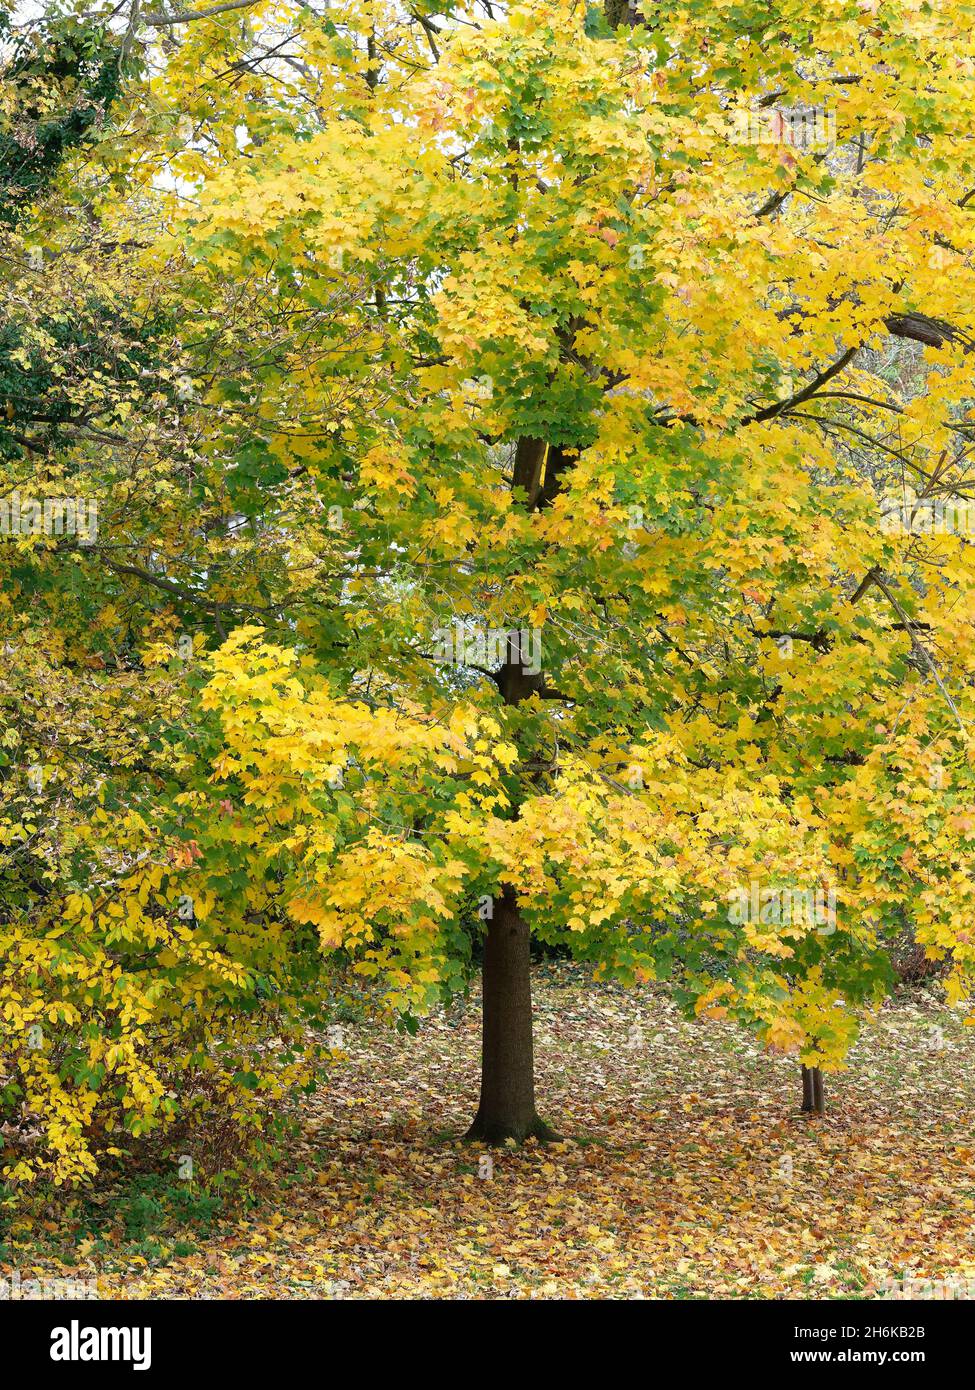 View of the colourful yellow leaves on a tall tree in autumn Stock Photo